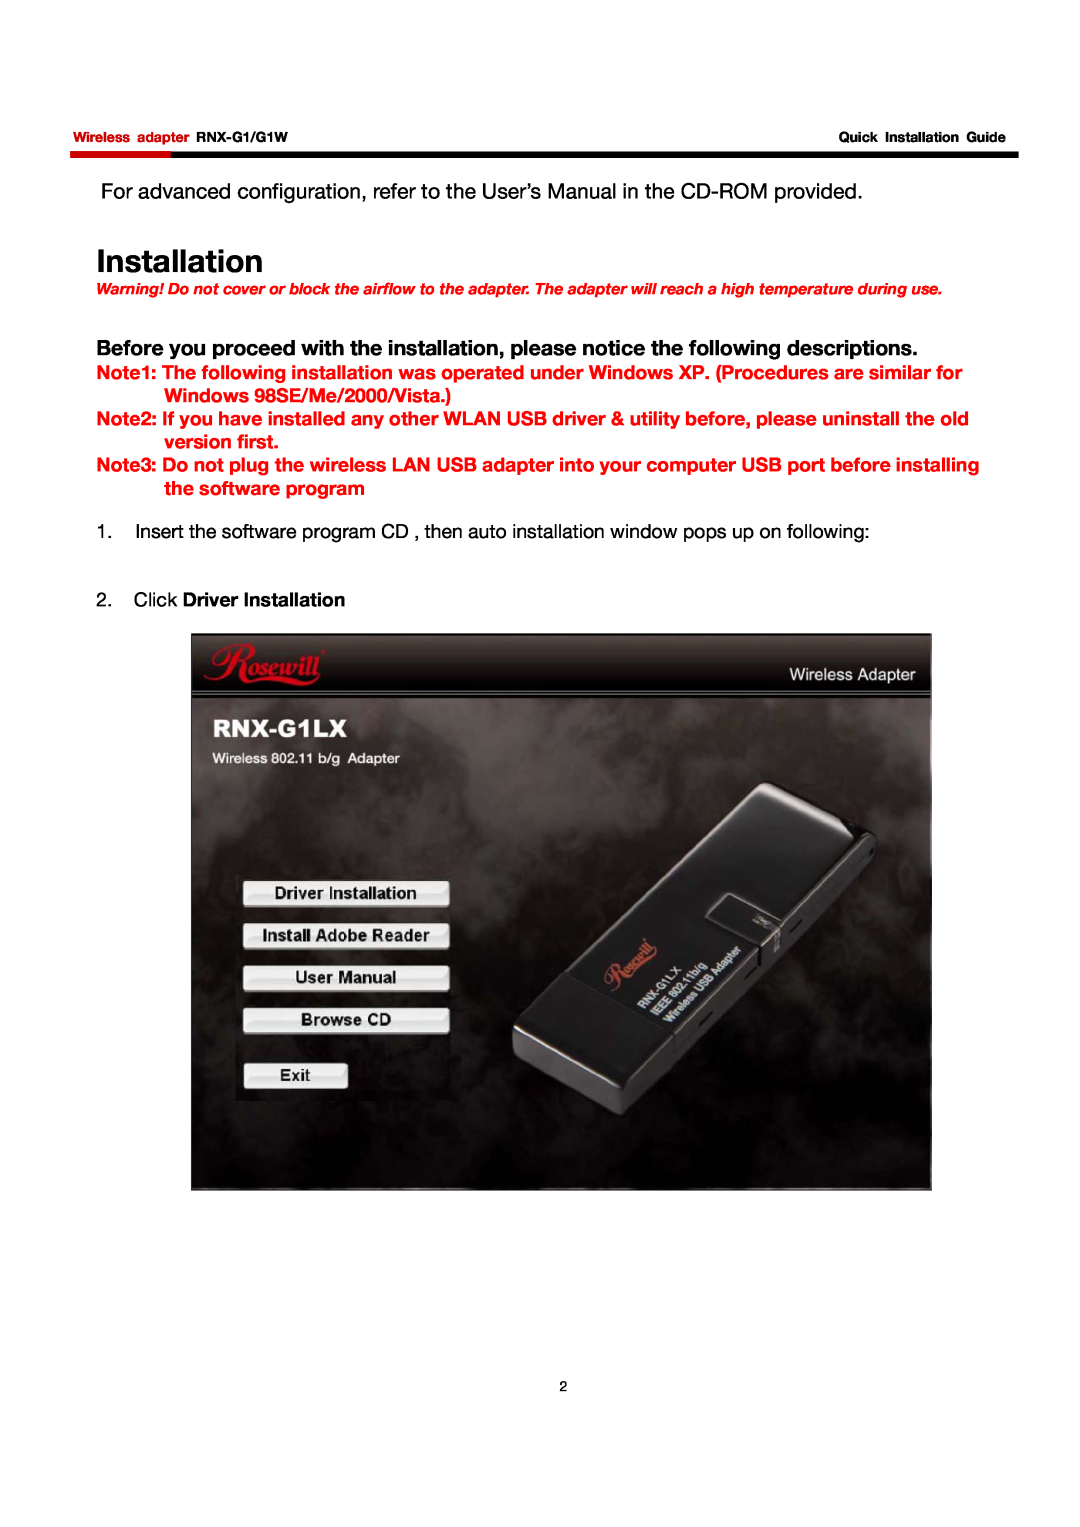 Rosewill RNX-G1/G1W manual Click Driver Installation 